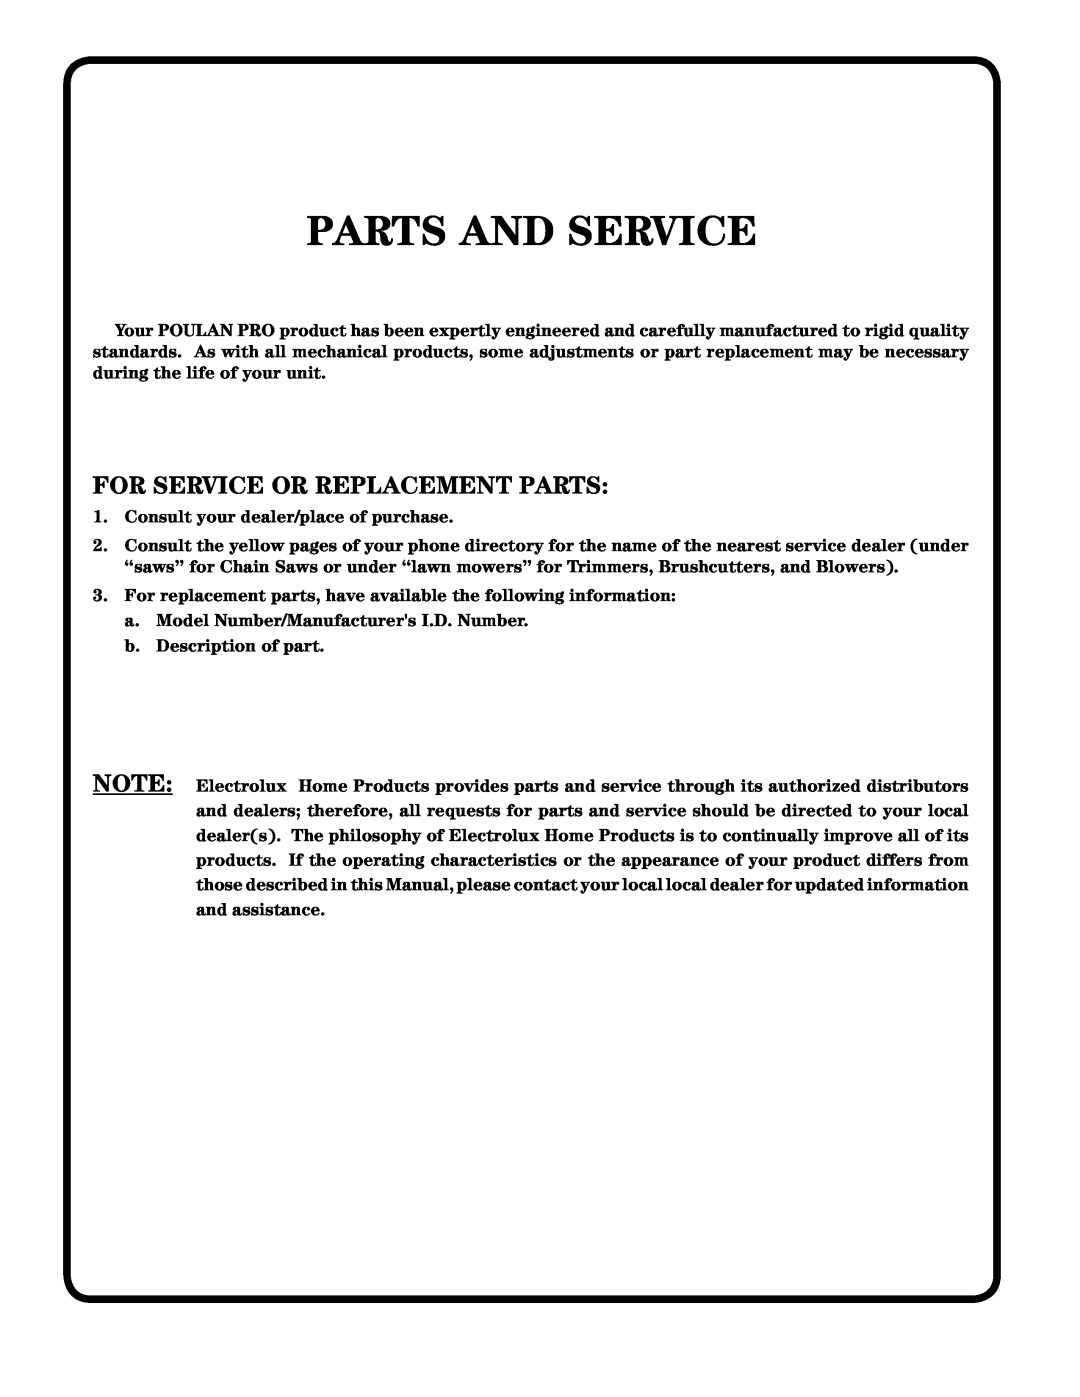 Poulan PD25PH48STB owner manual Parts And Service, For Service Or Replacement Parts 